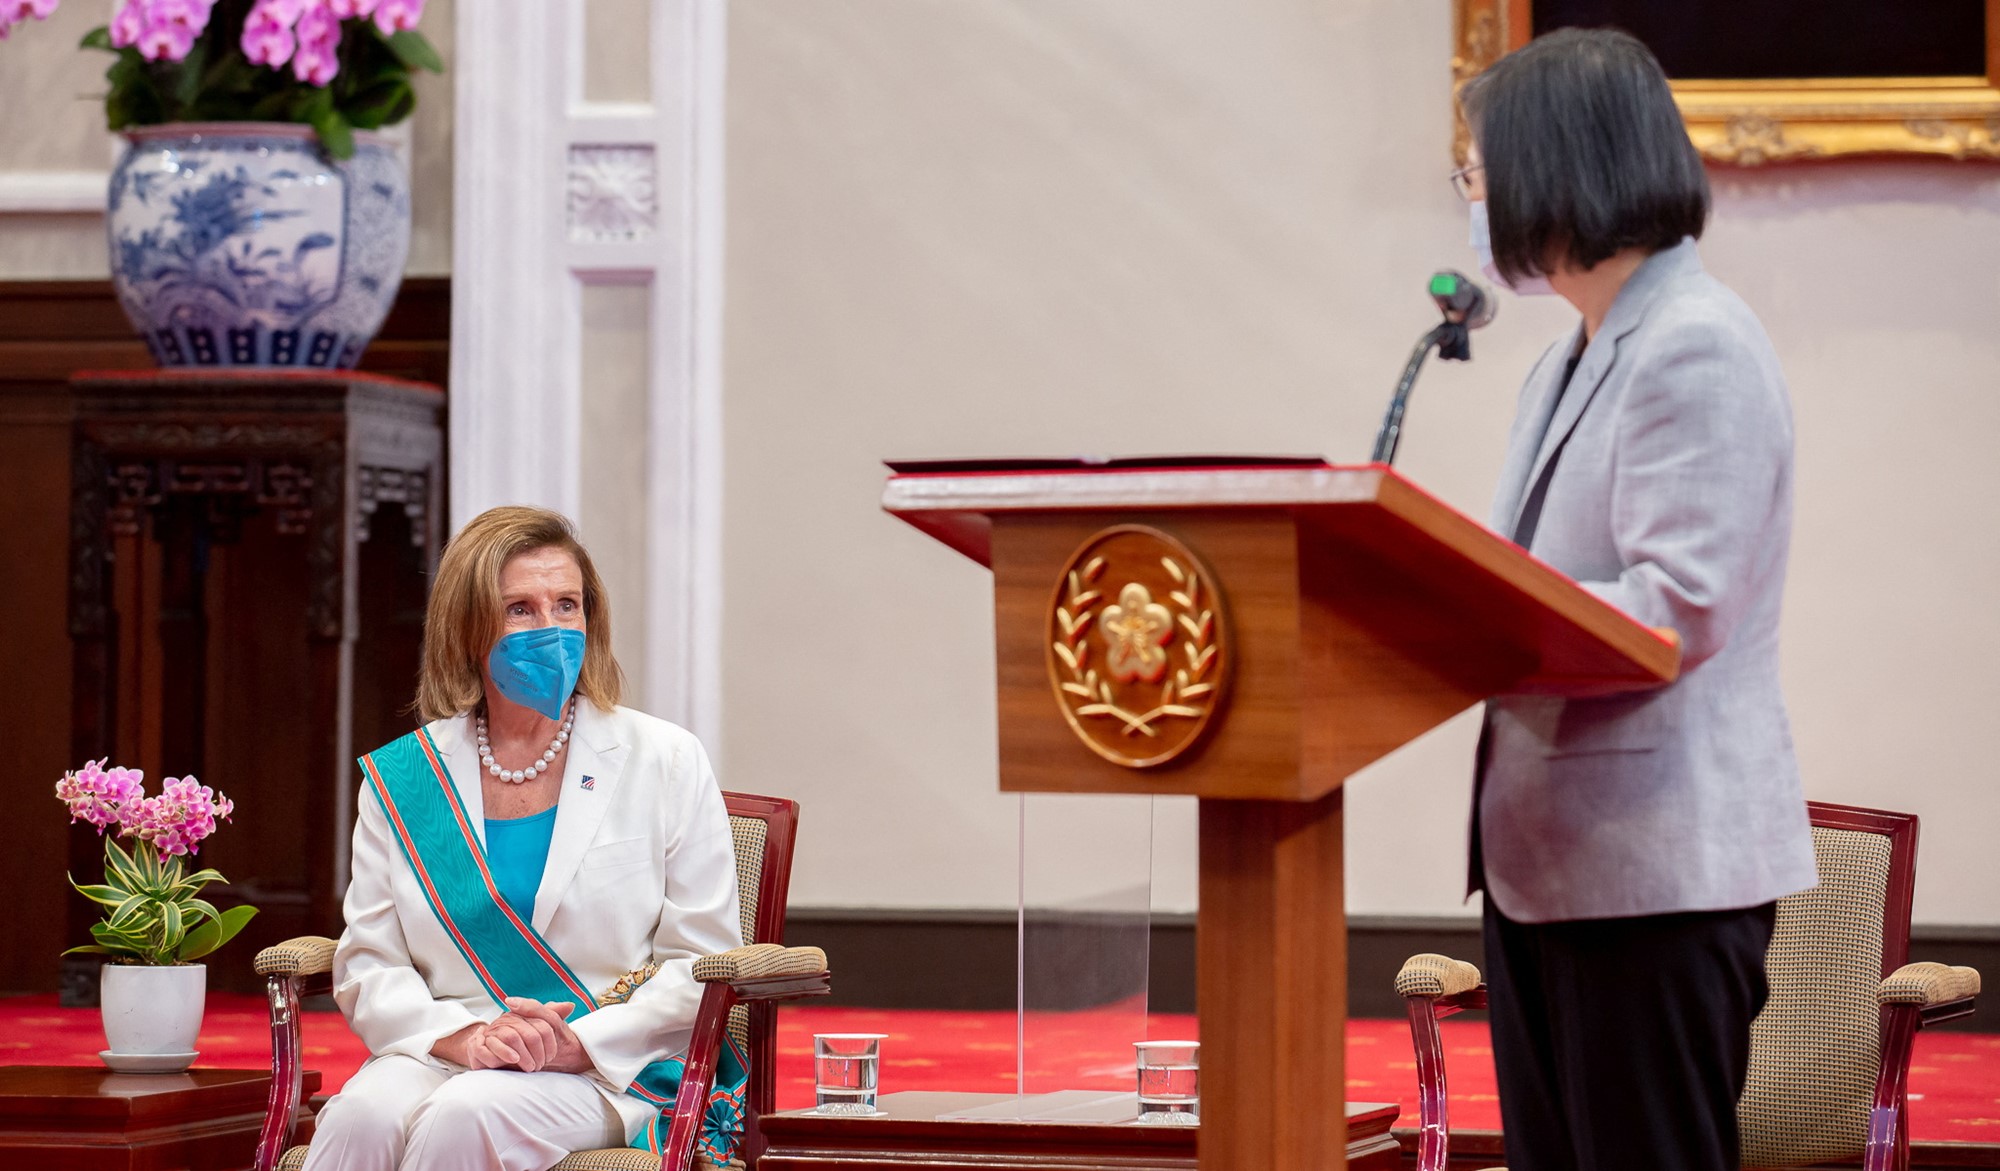 A woman standing behind a lectern looks at another woman who is seated.